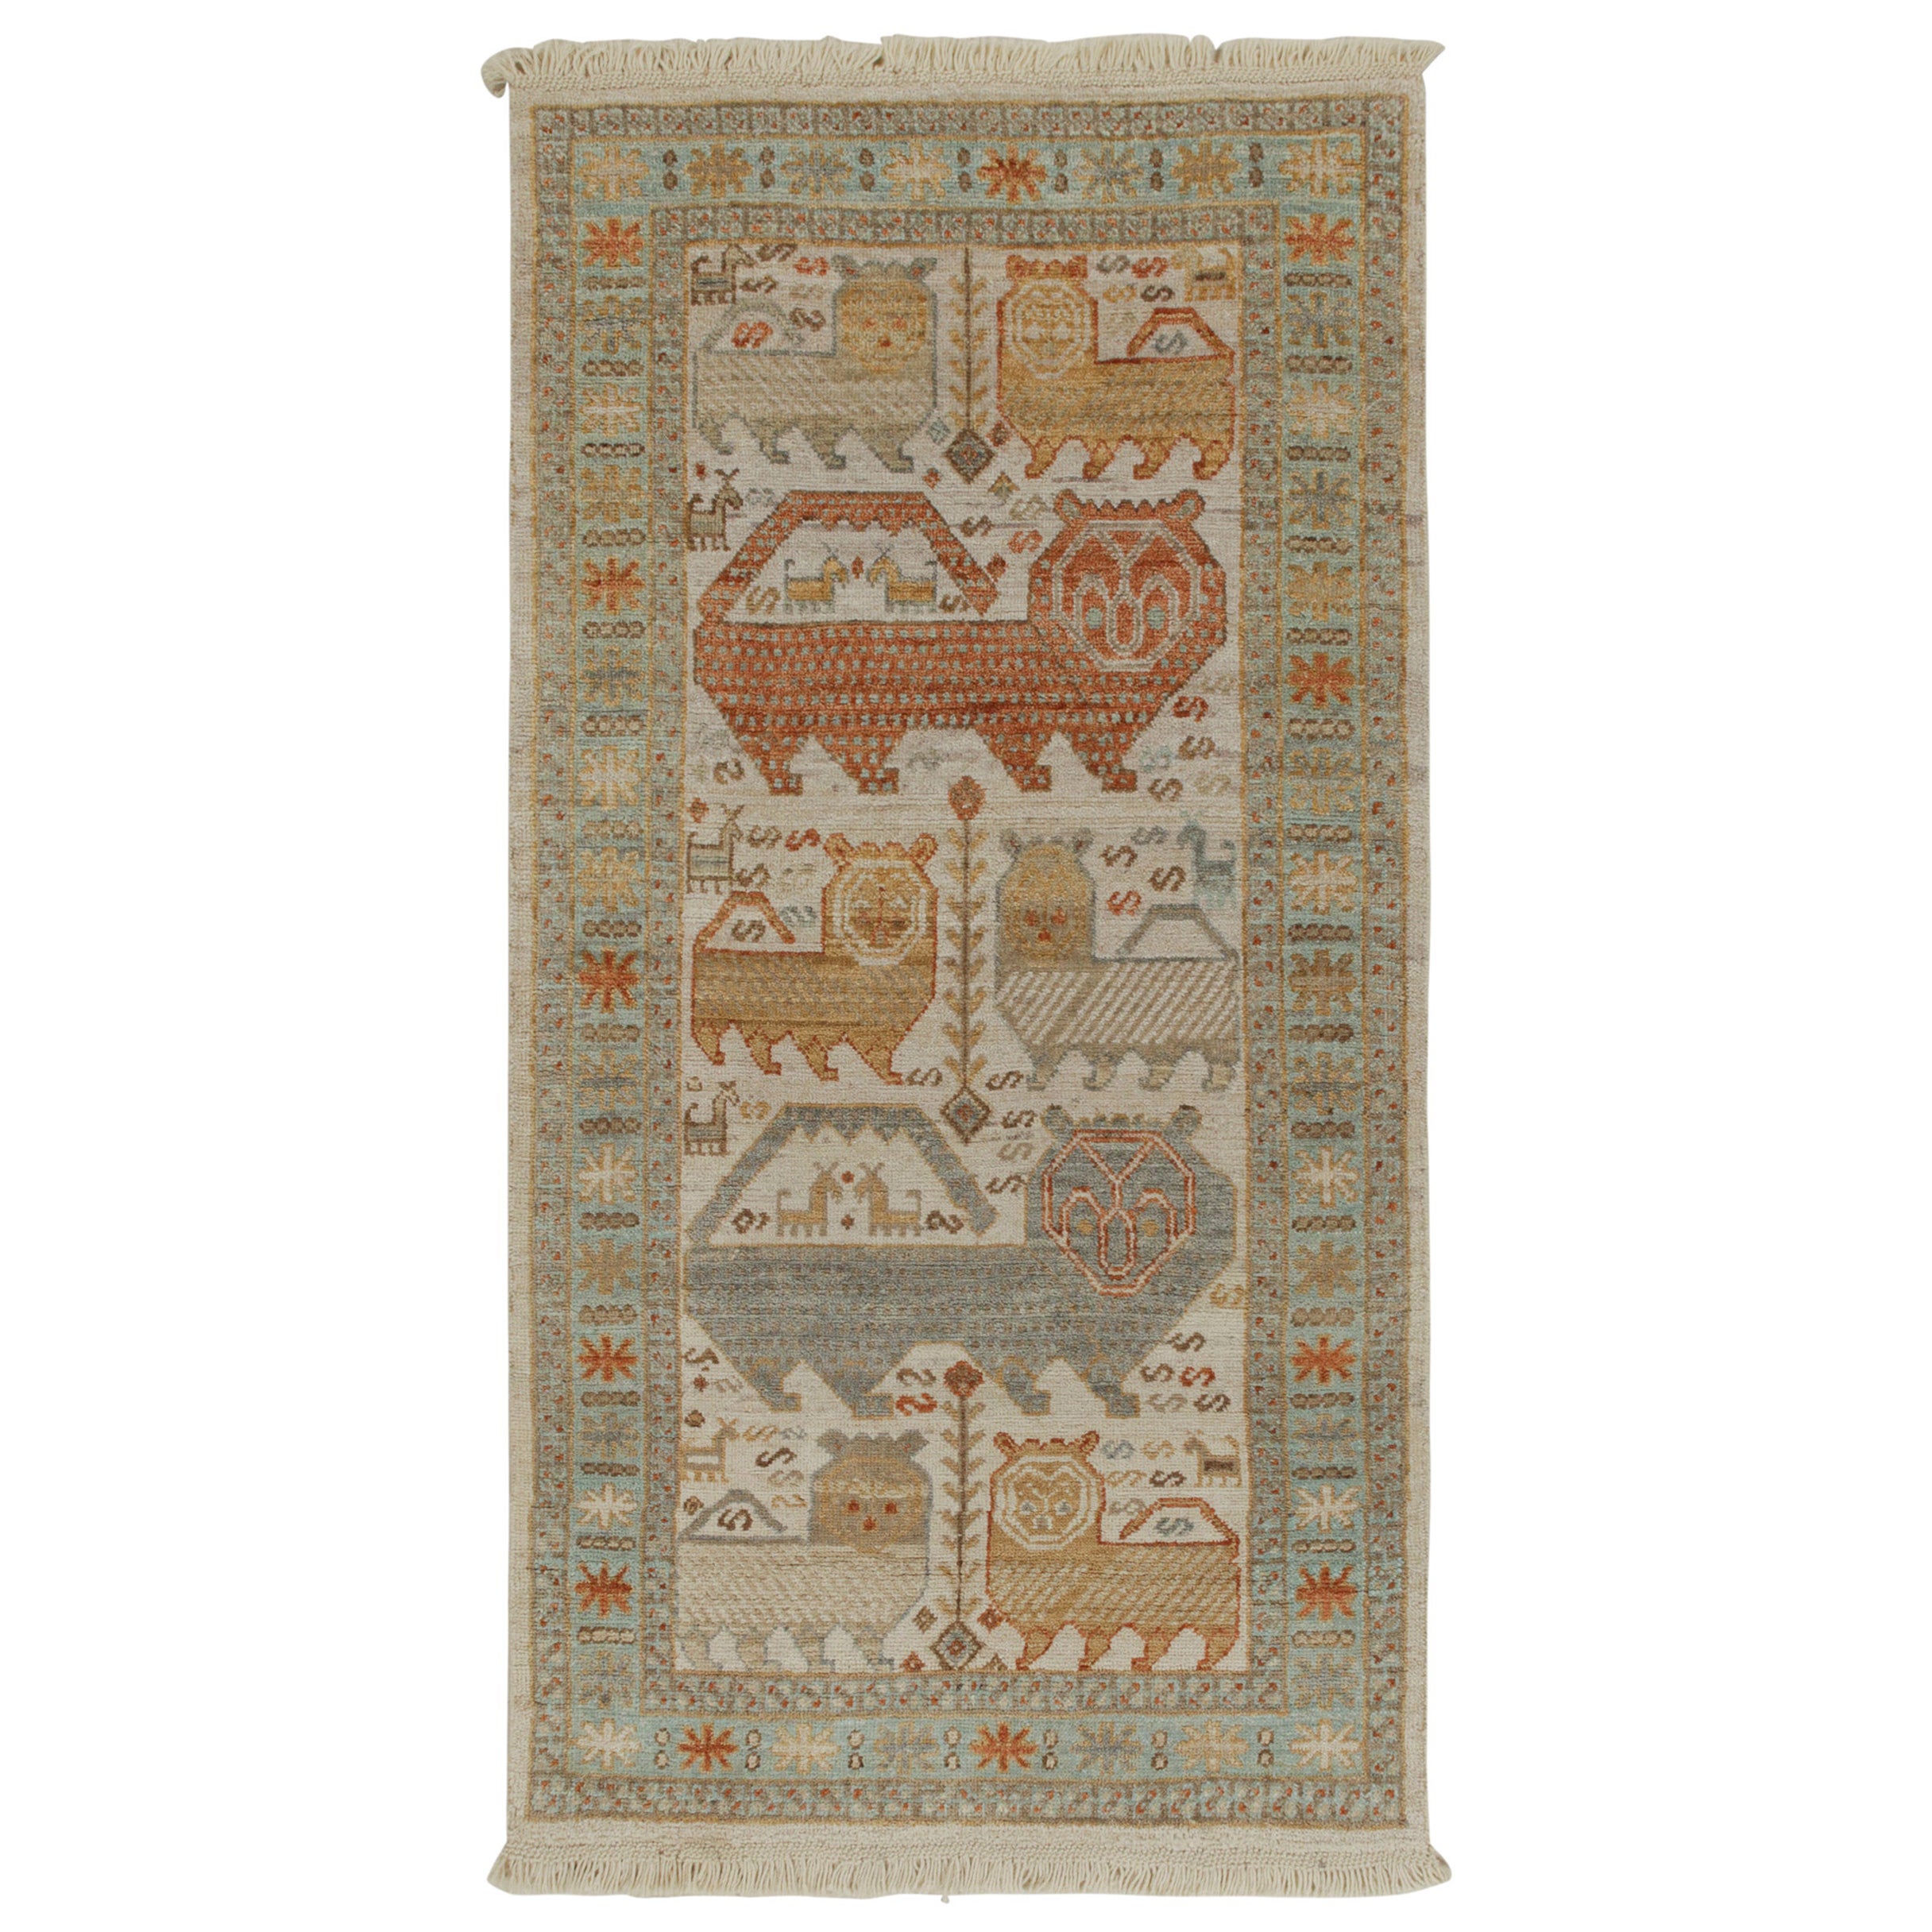  Rug & Kilim’s Tribal style runner in Beige-Brown, Blue and Red Pictorials For Sale